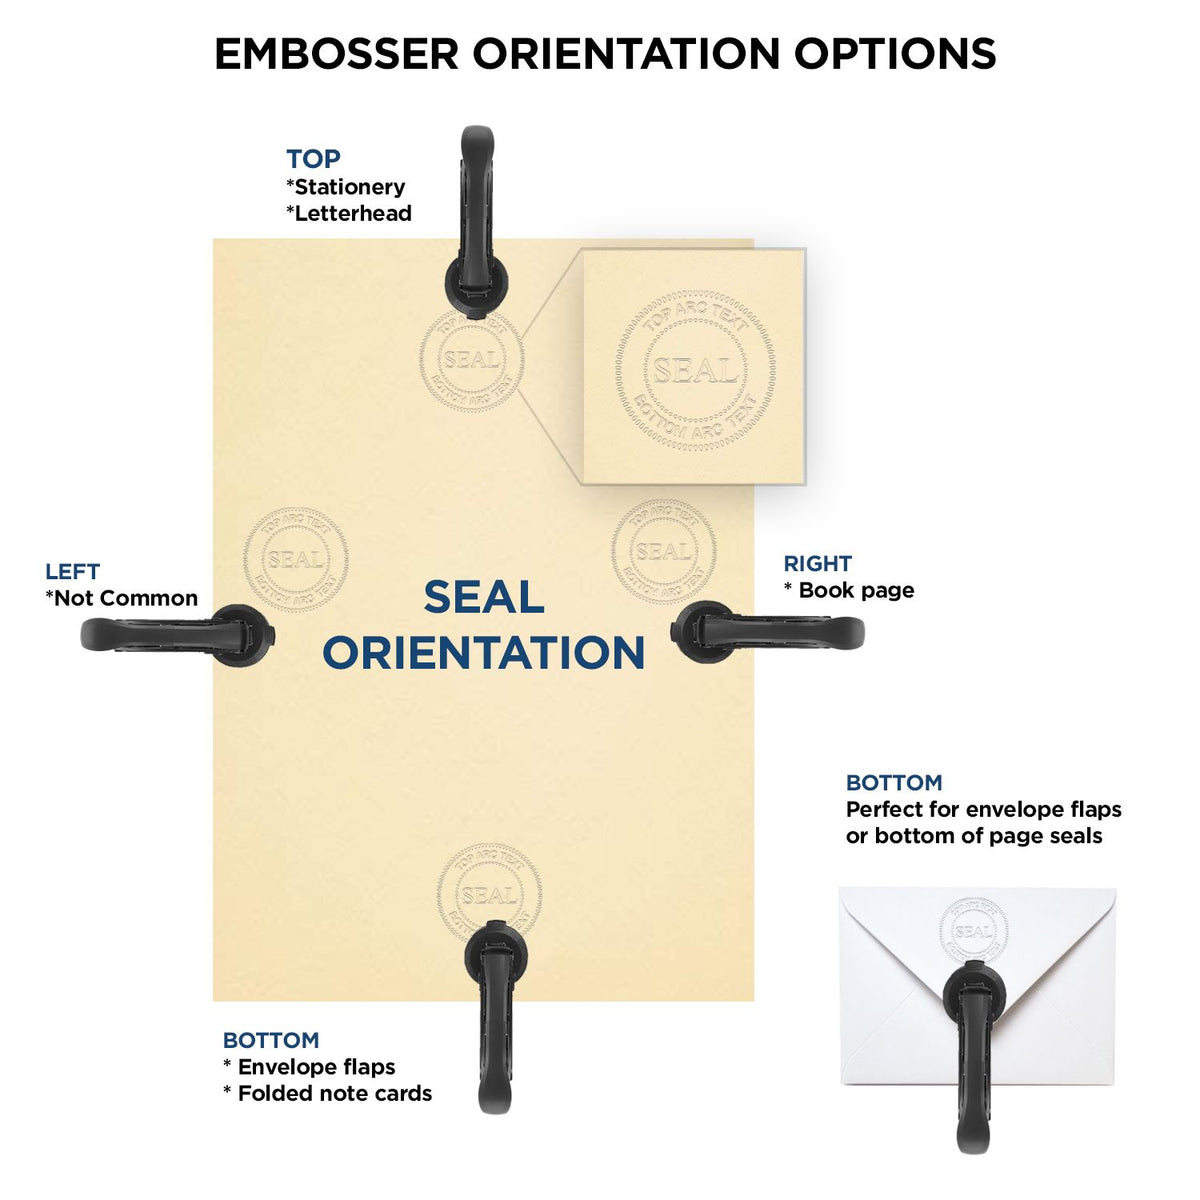 An infographic for the Heavy Duty Cast Iron South Dakota Engineer Seal Embosser showing embosser orientation, this is showing examples of a top, bottom, right and left insert.